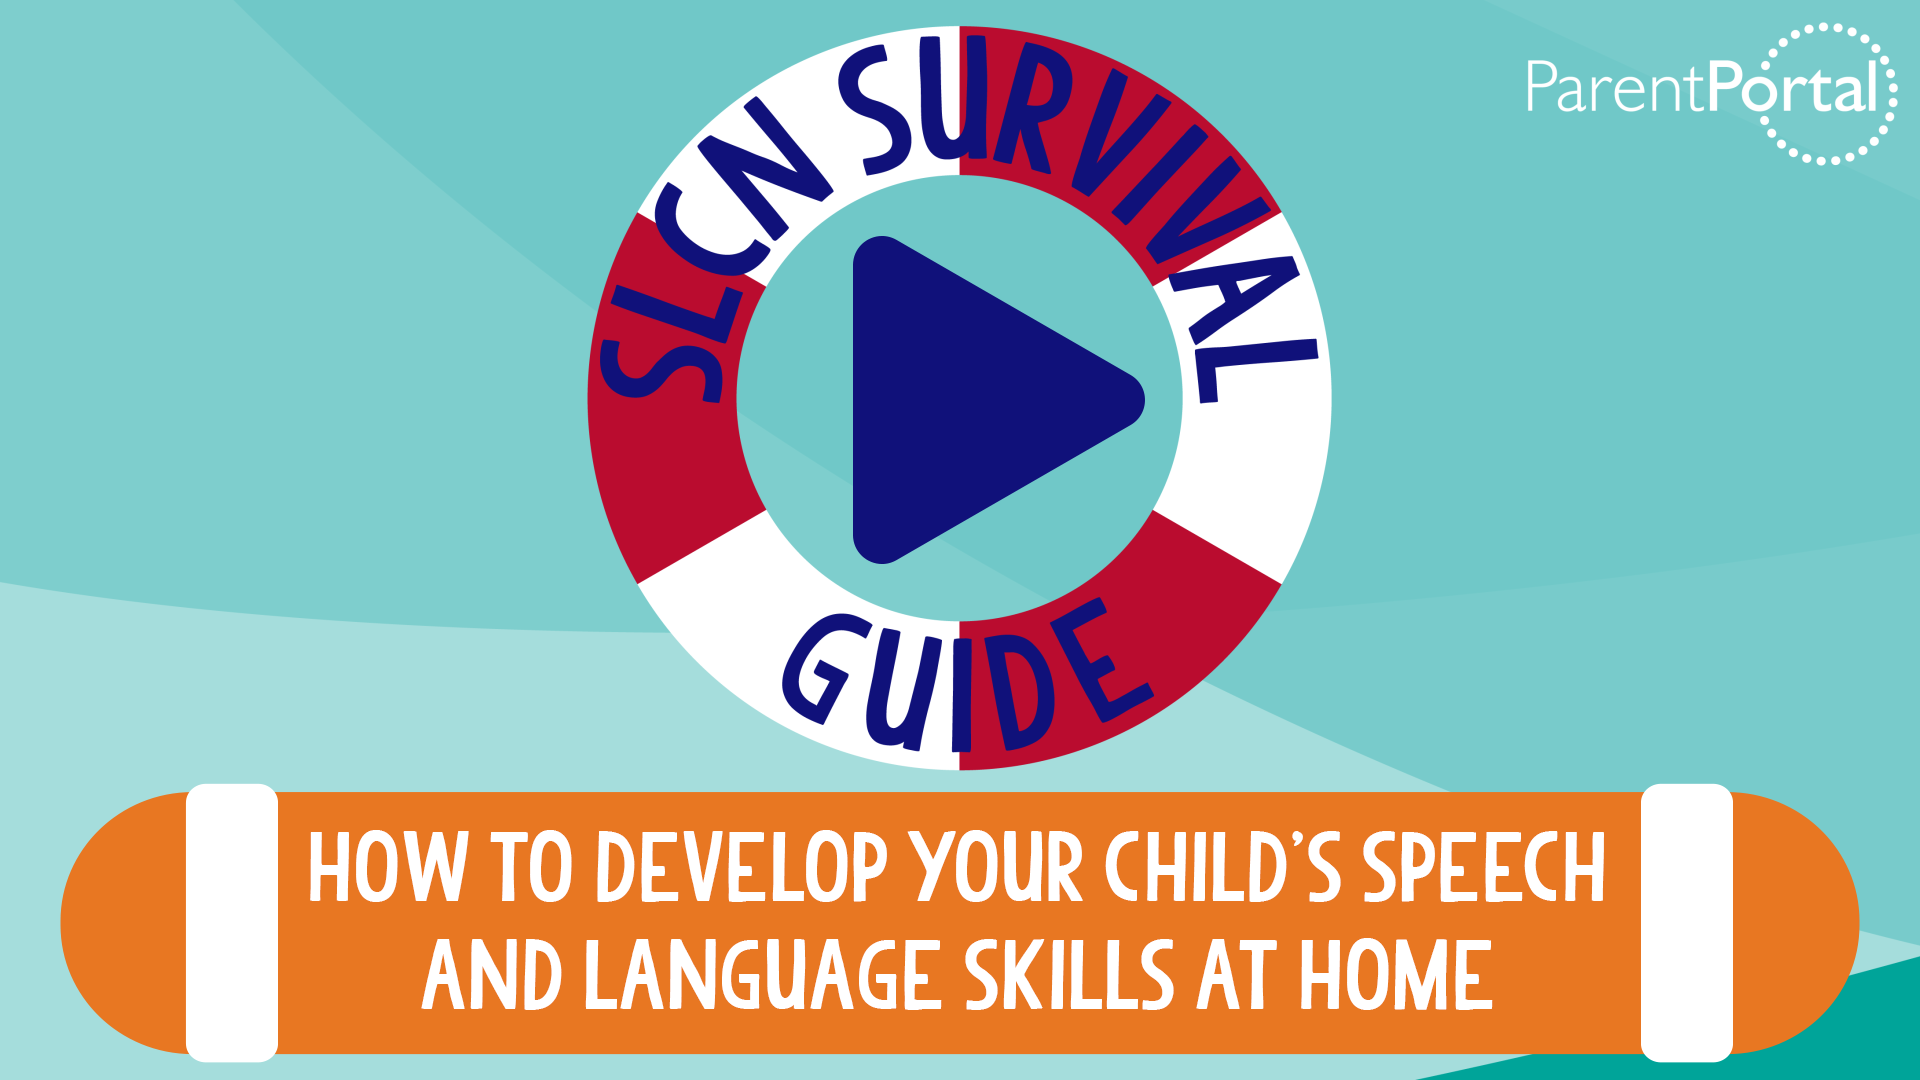 SLCN Survival Guide 9 - How to Develop your Child's Speech and Language Skills at Home